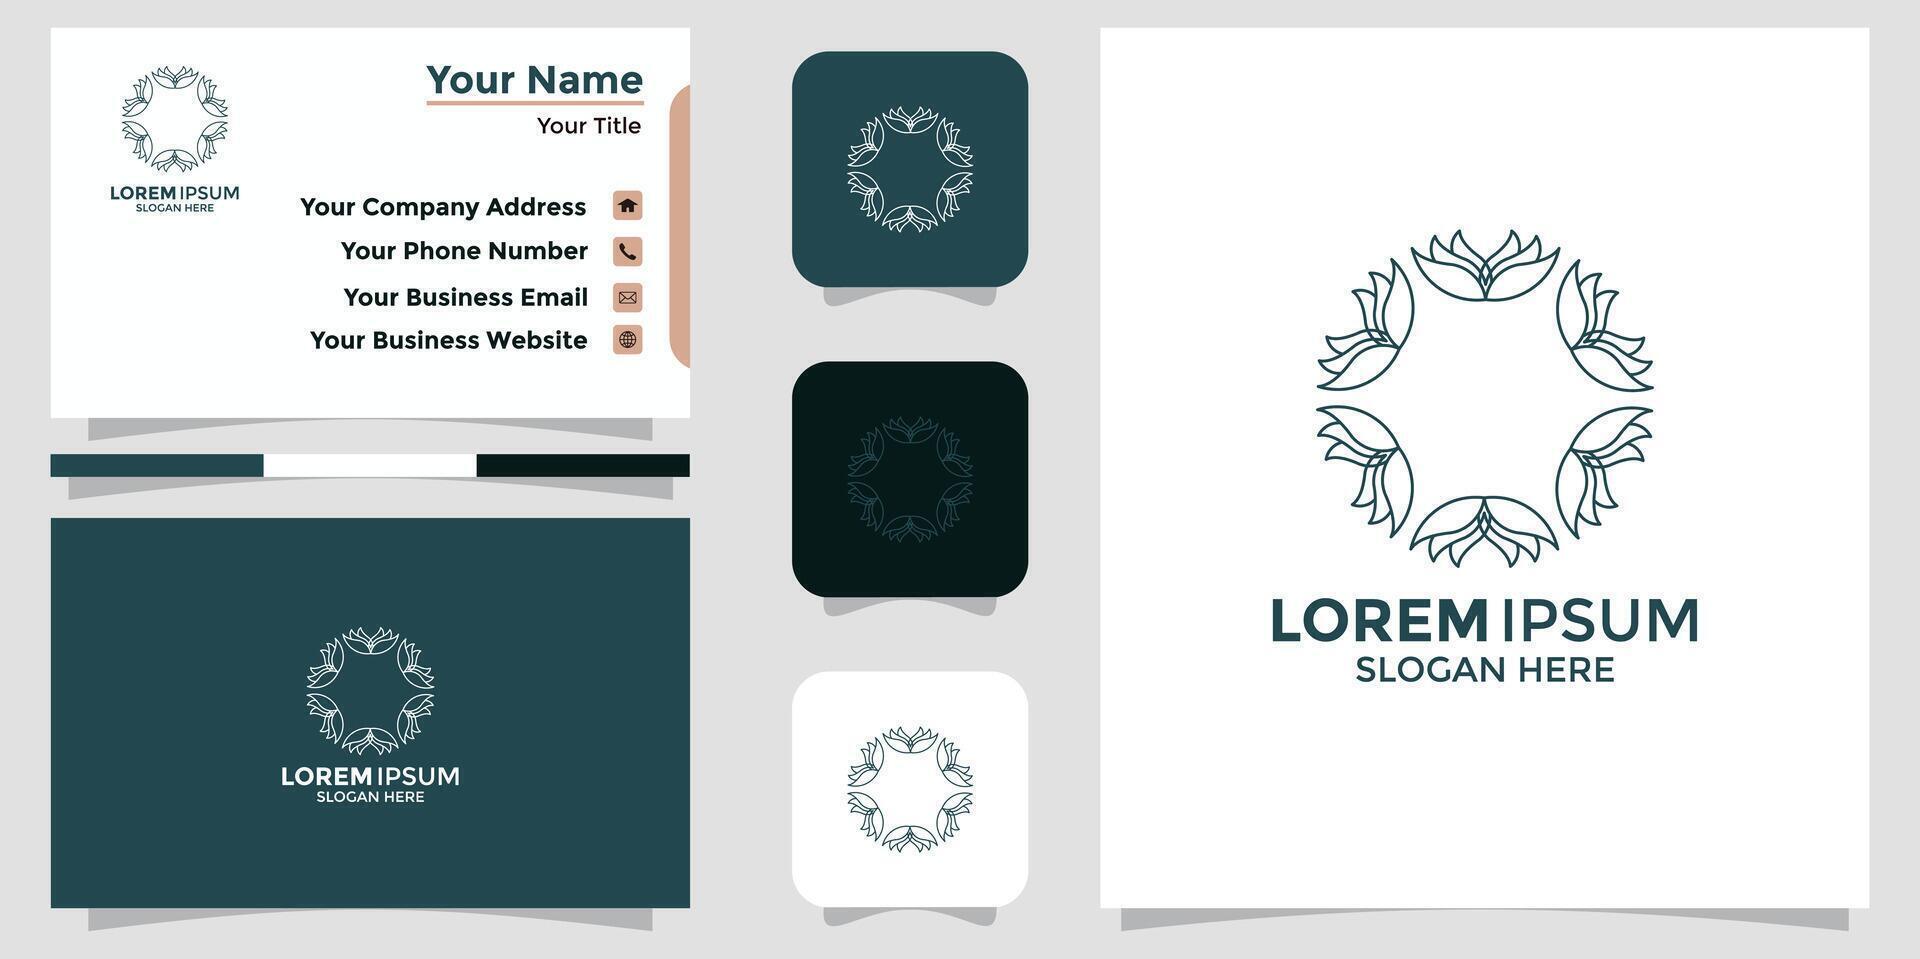 Abstract elegant flower logo icon and business card vector